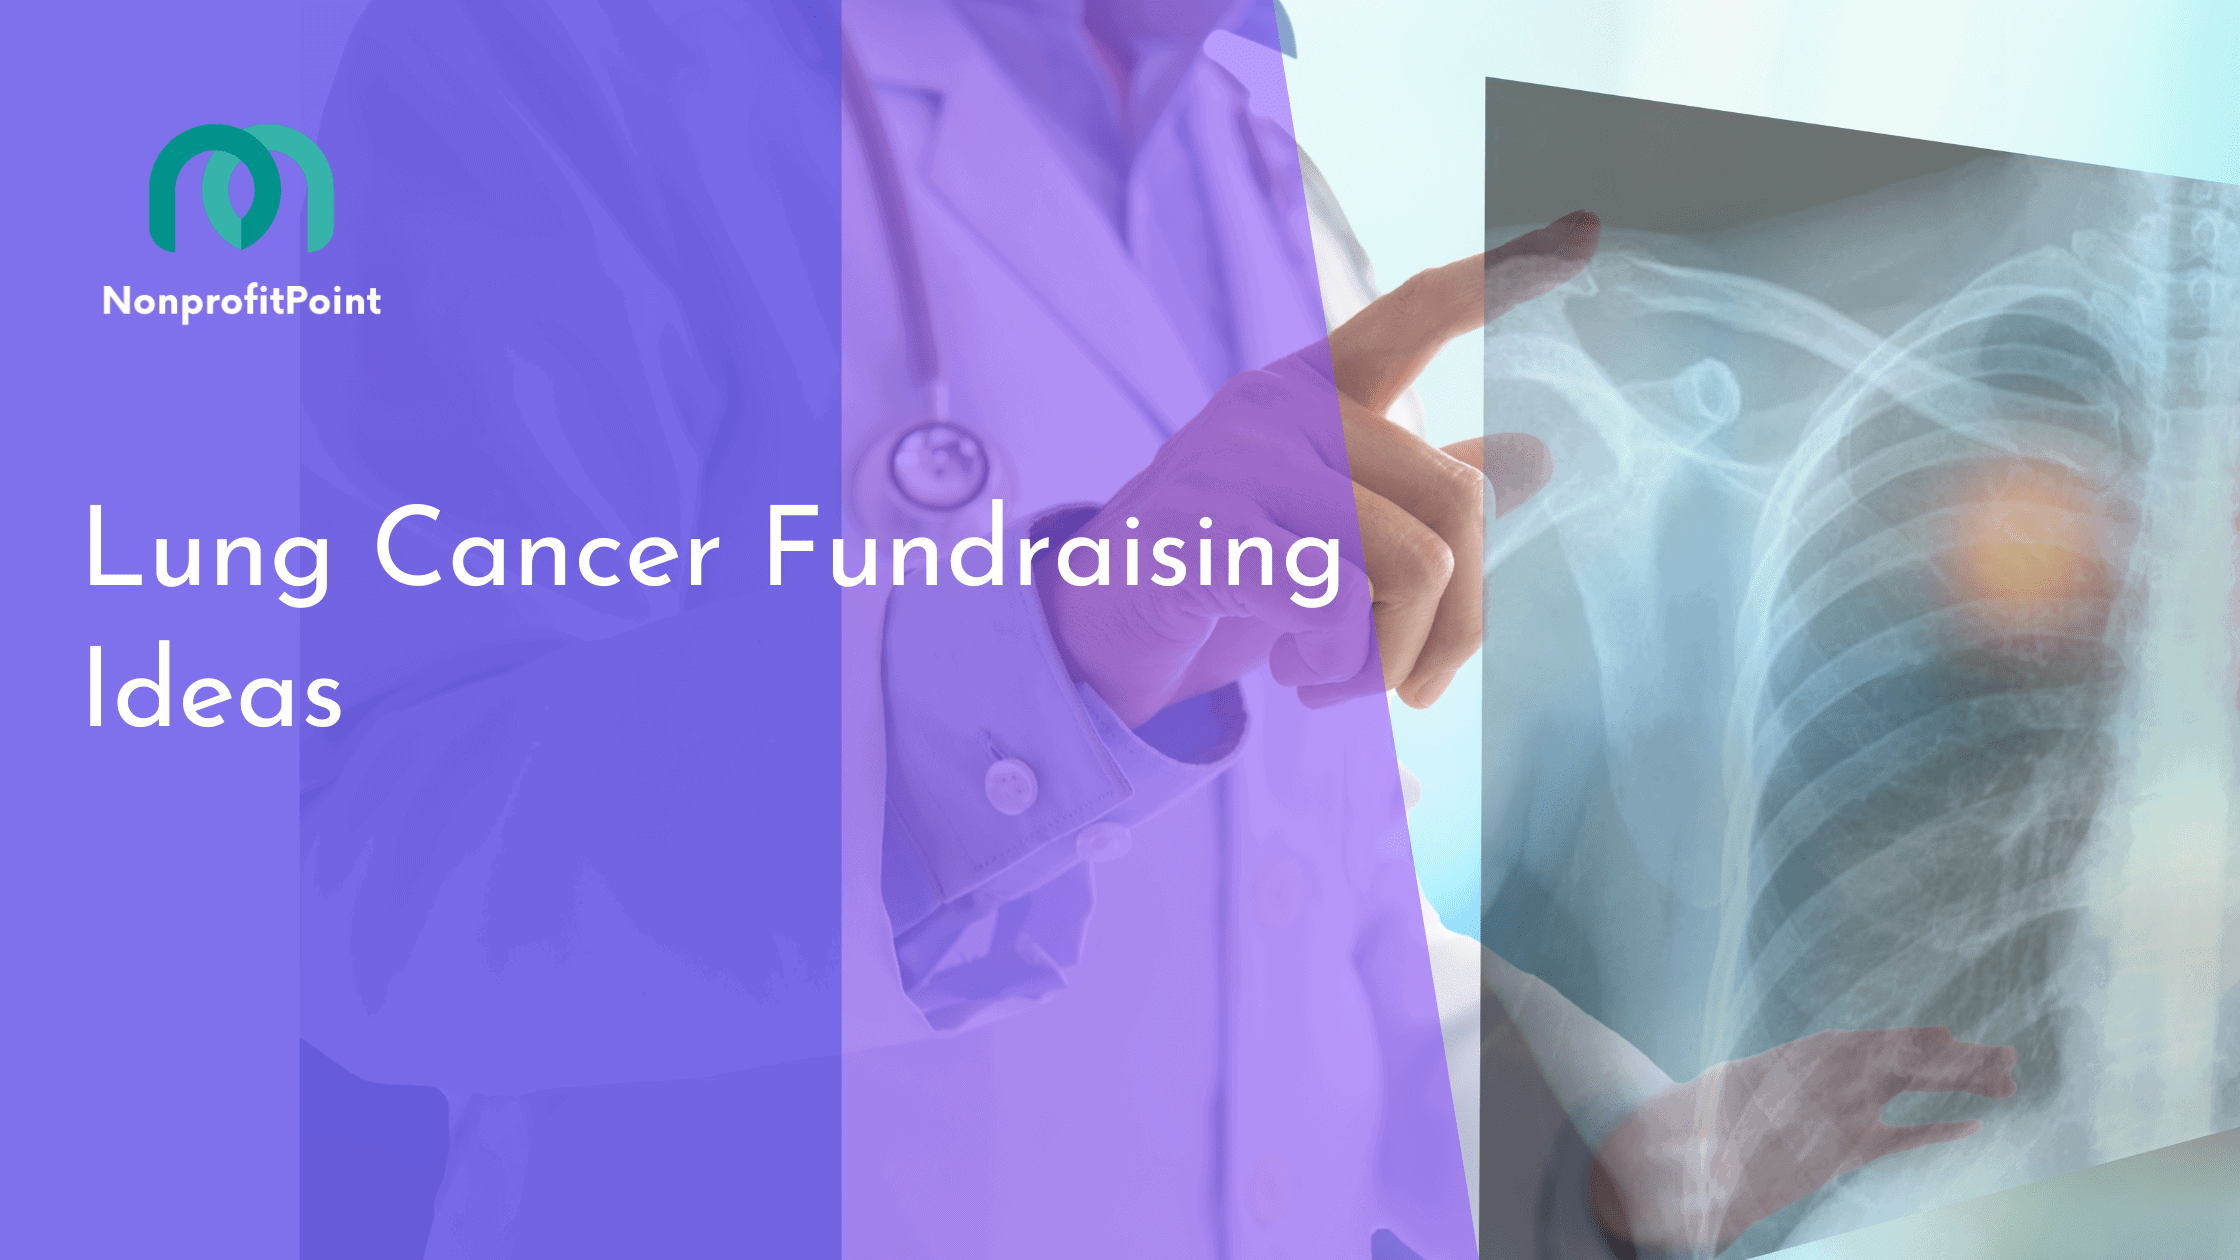 Lung Cancer Fundraising Ideas